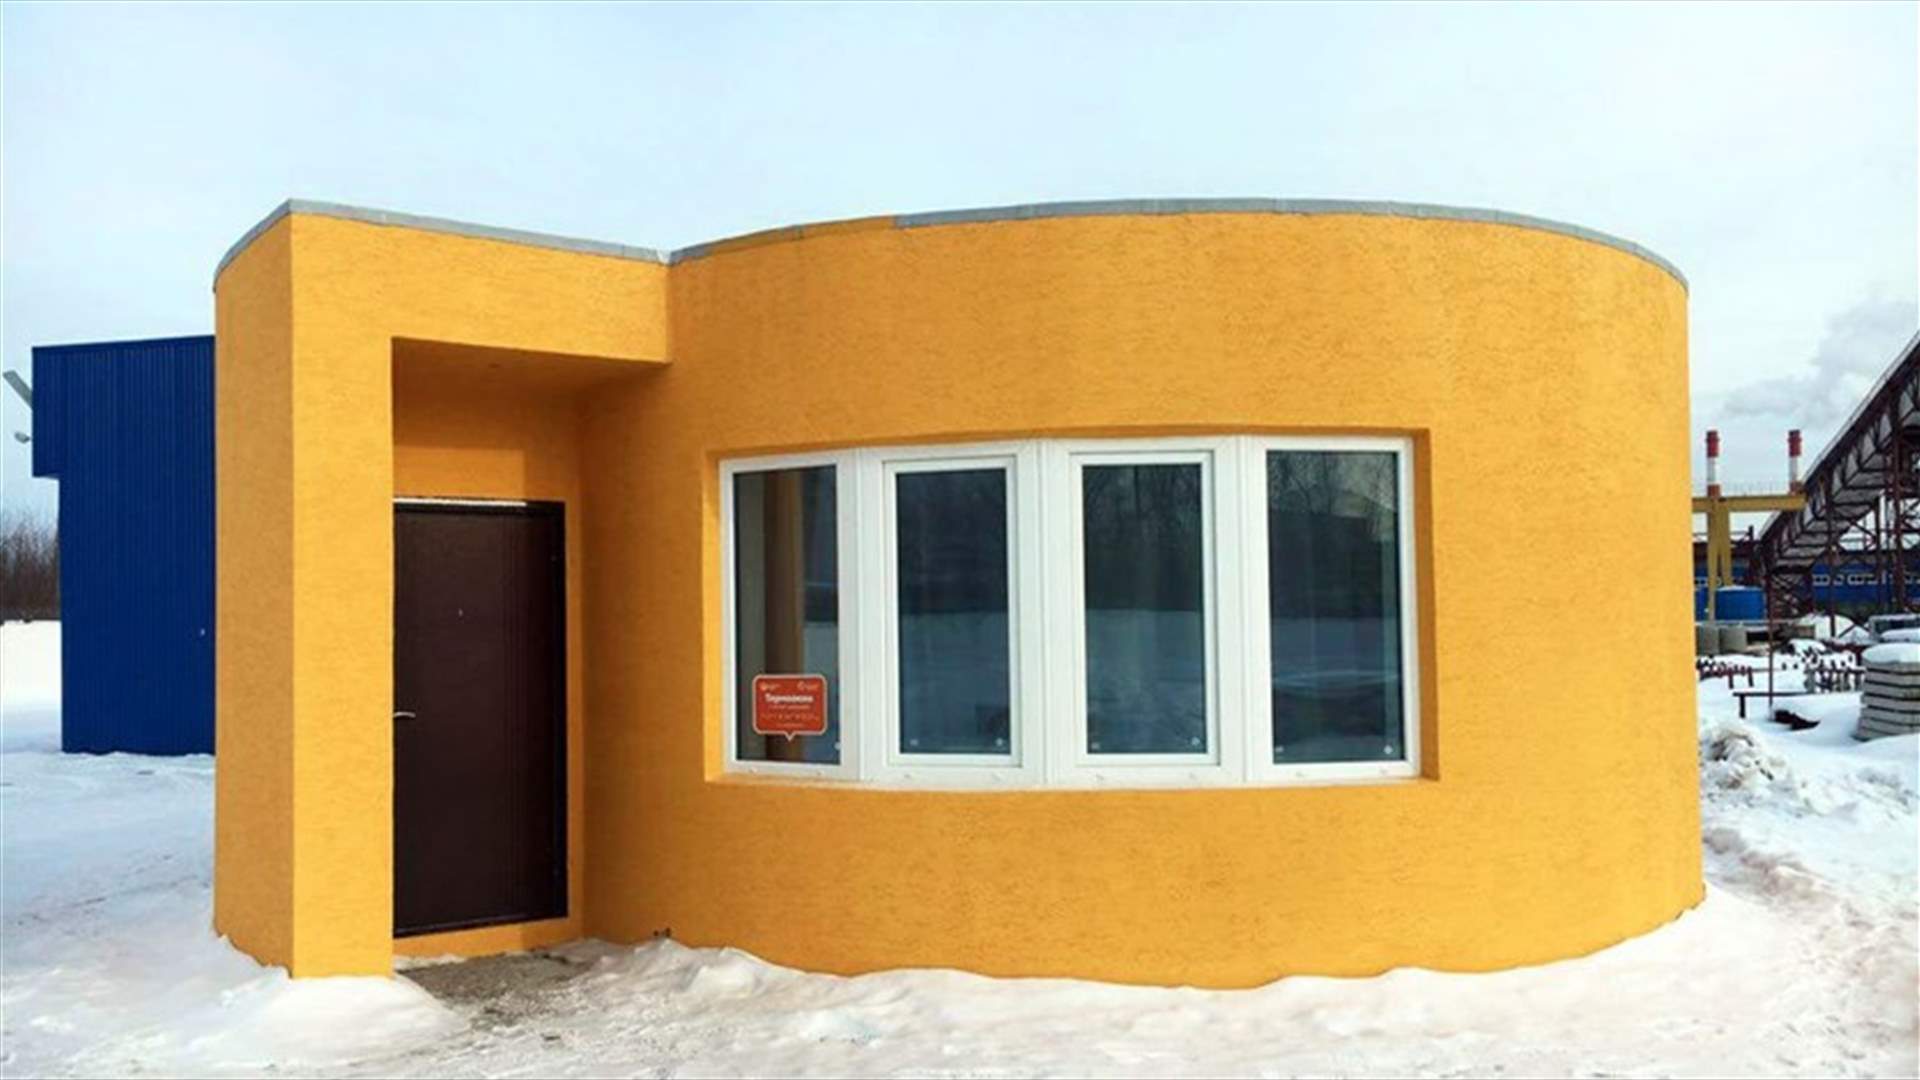 [VIDEO] Now You Can Print Your House In Just 24 Hours